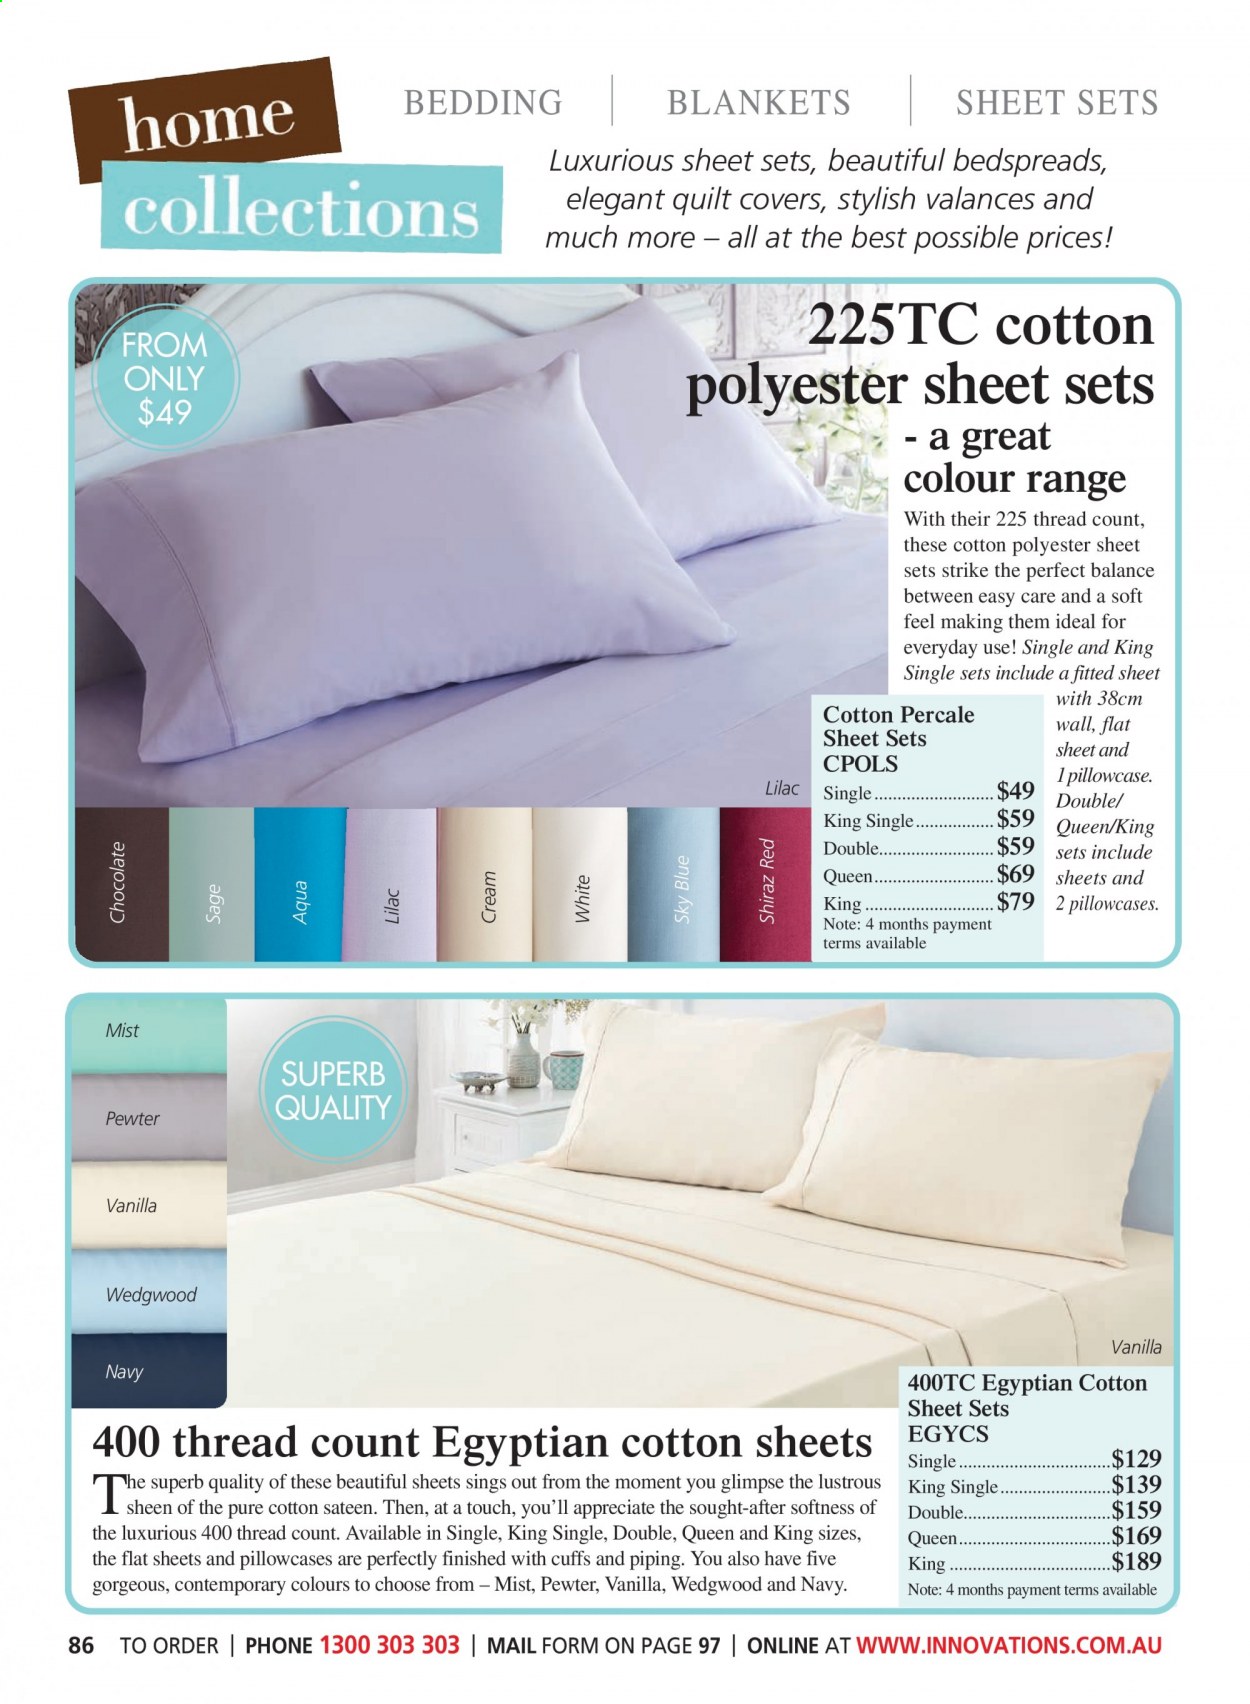 thumbnail - Innovations Catalogue - Sales products - bedding, bedspread, blanket, pillowcase, quilt, quilt cover set. Page 86.